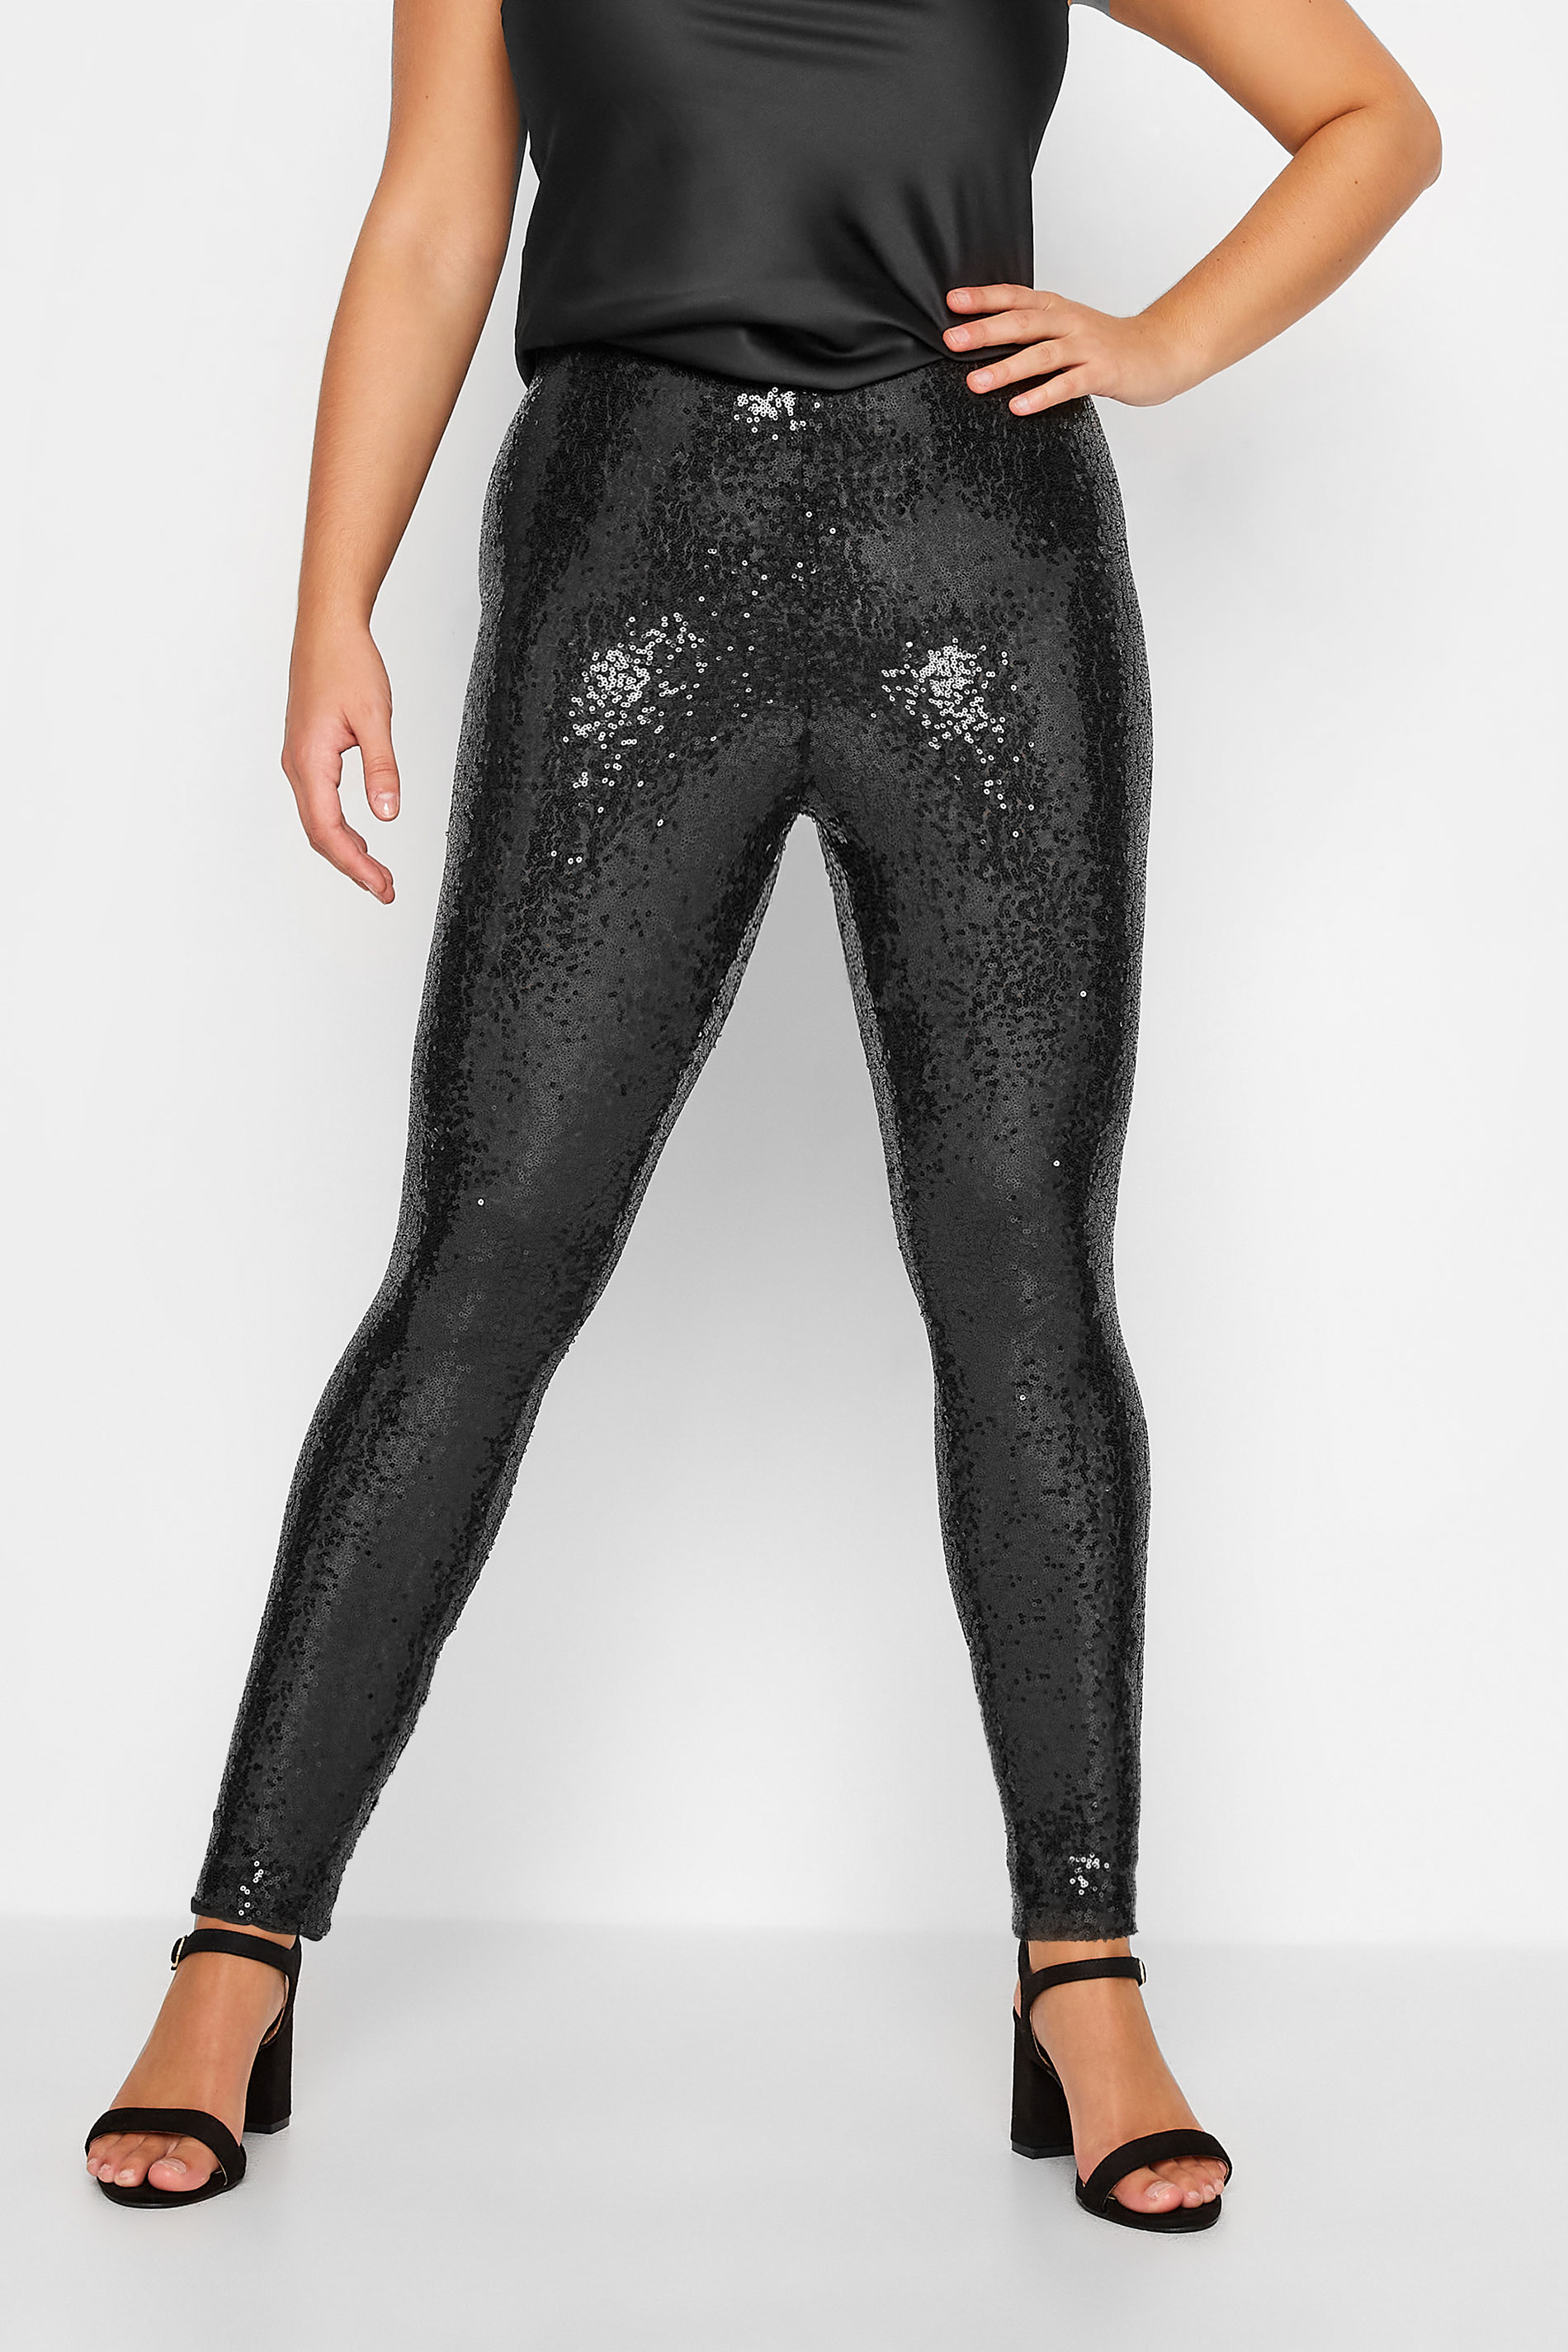 Plus Size Black Sequin Stretch Leggings | Yours Clothing 1